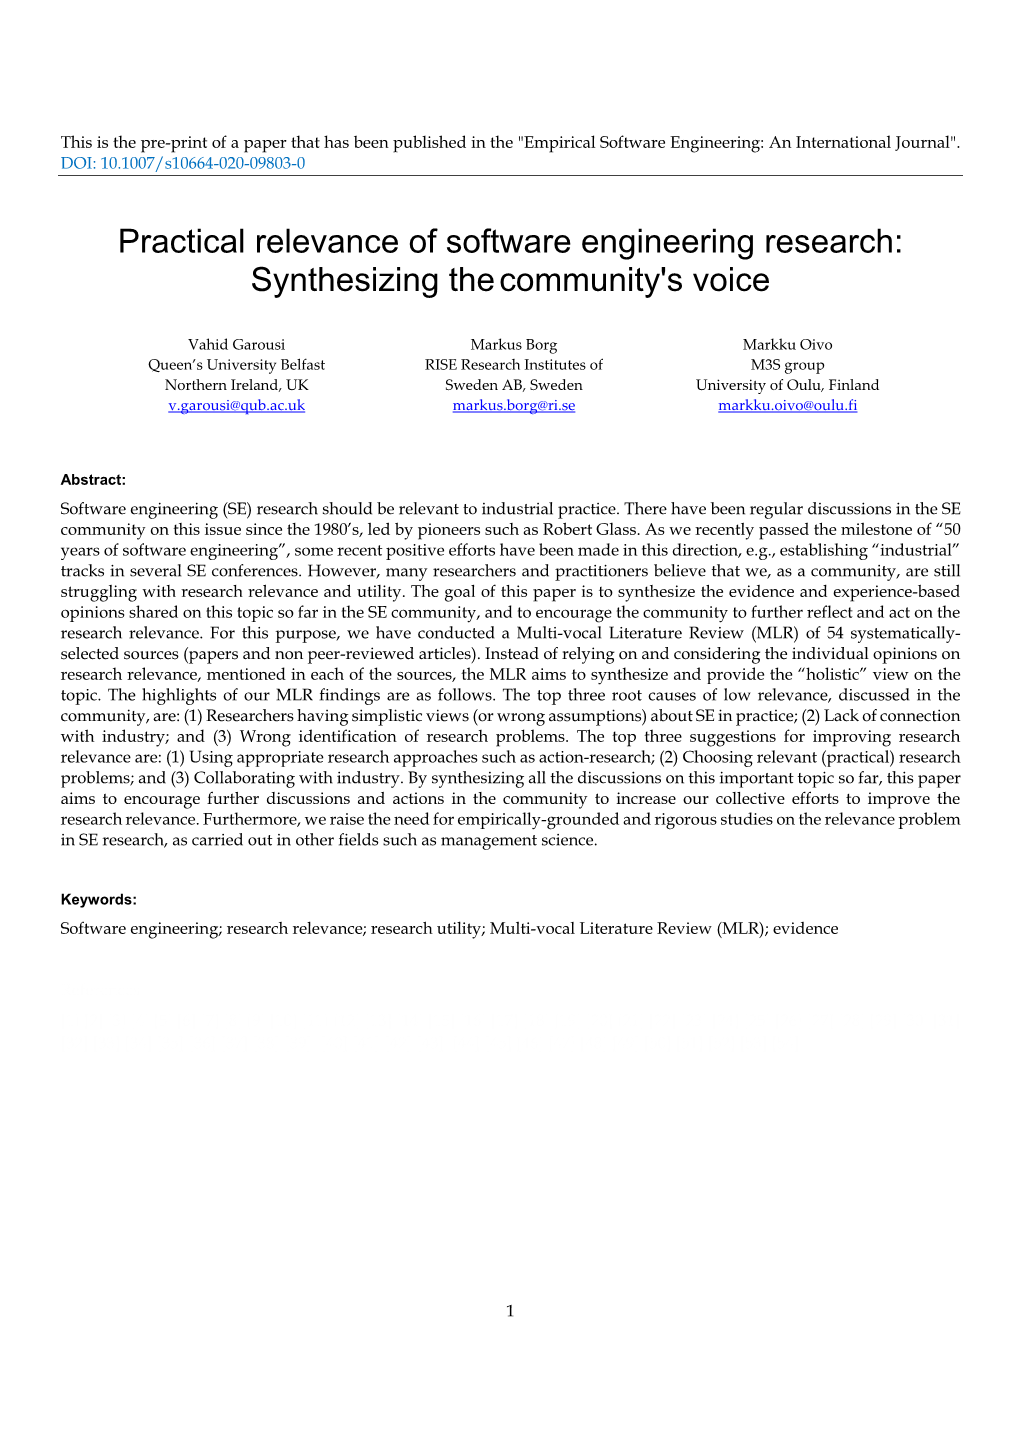 Practical Relevance of Software Engineering Research